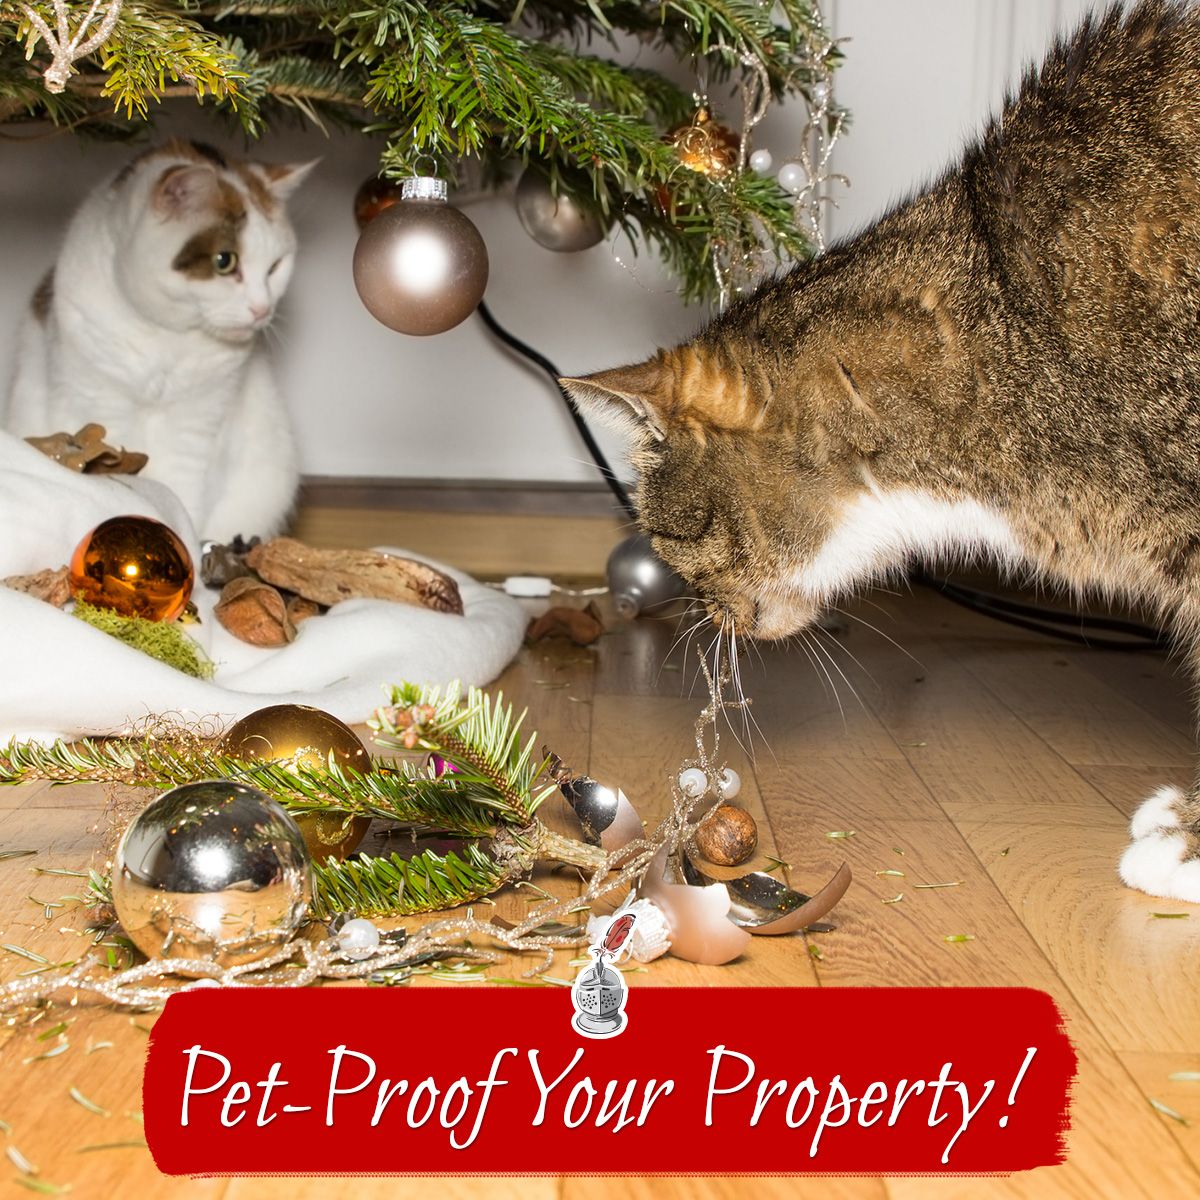 Pet-Proof your Property!